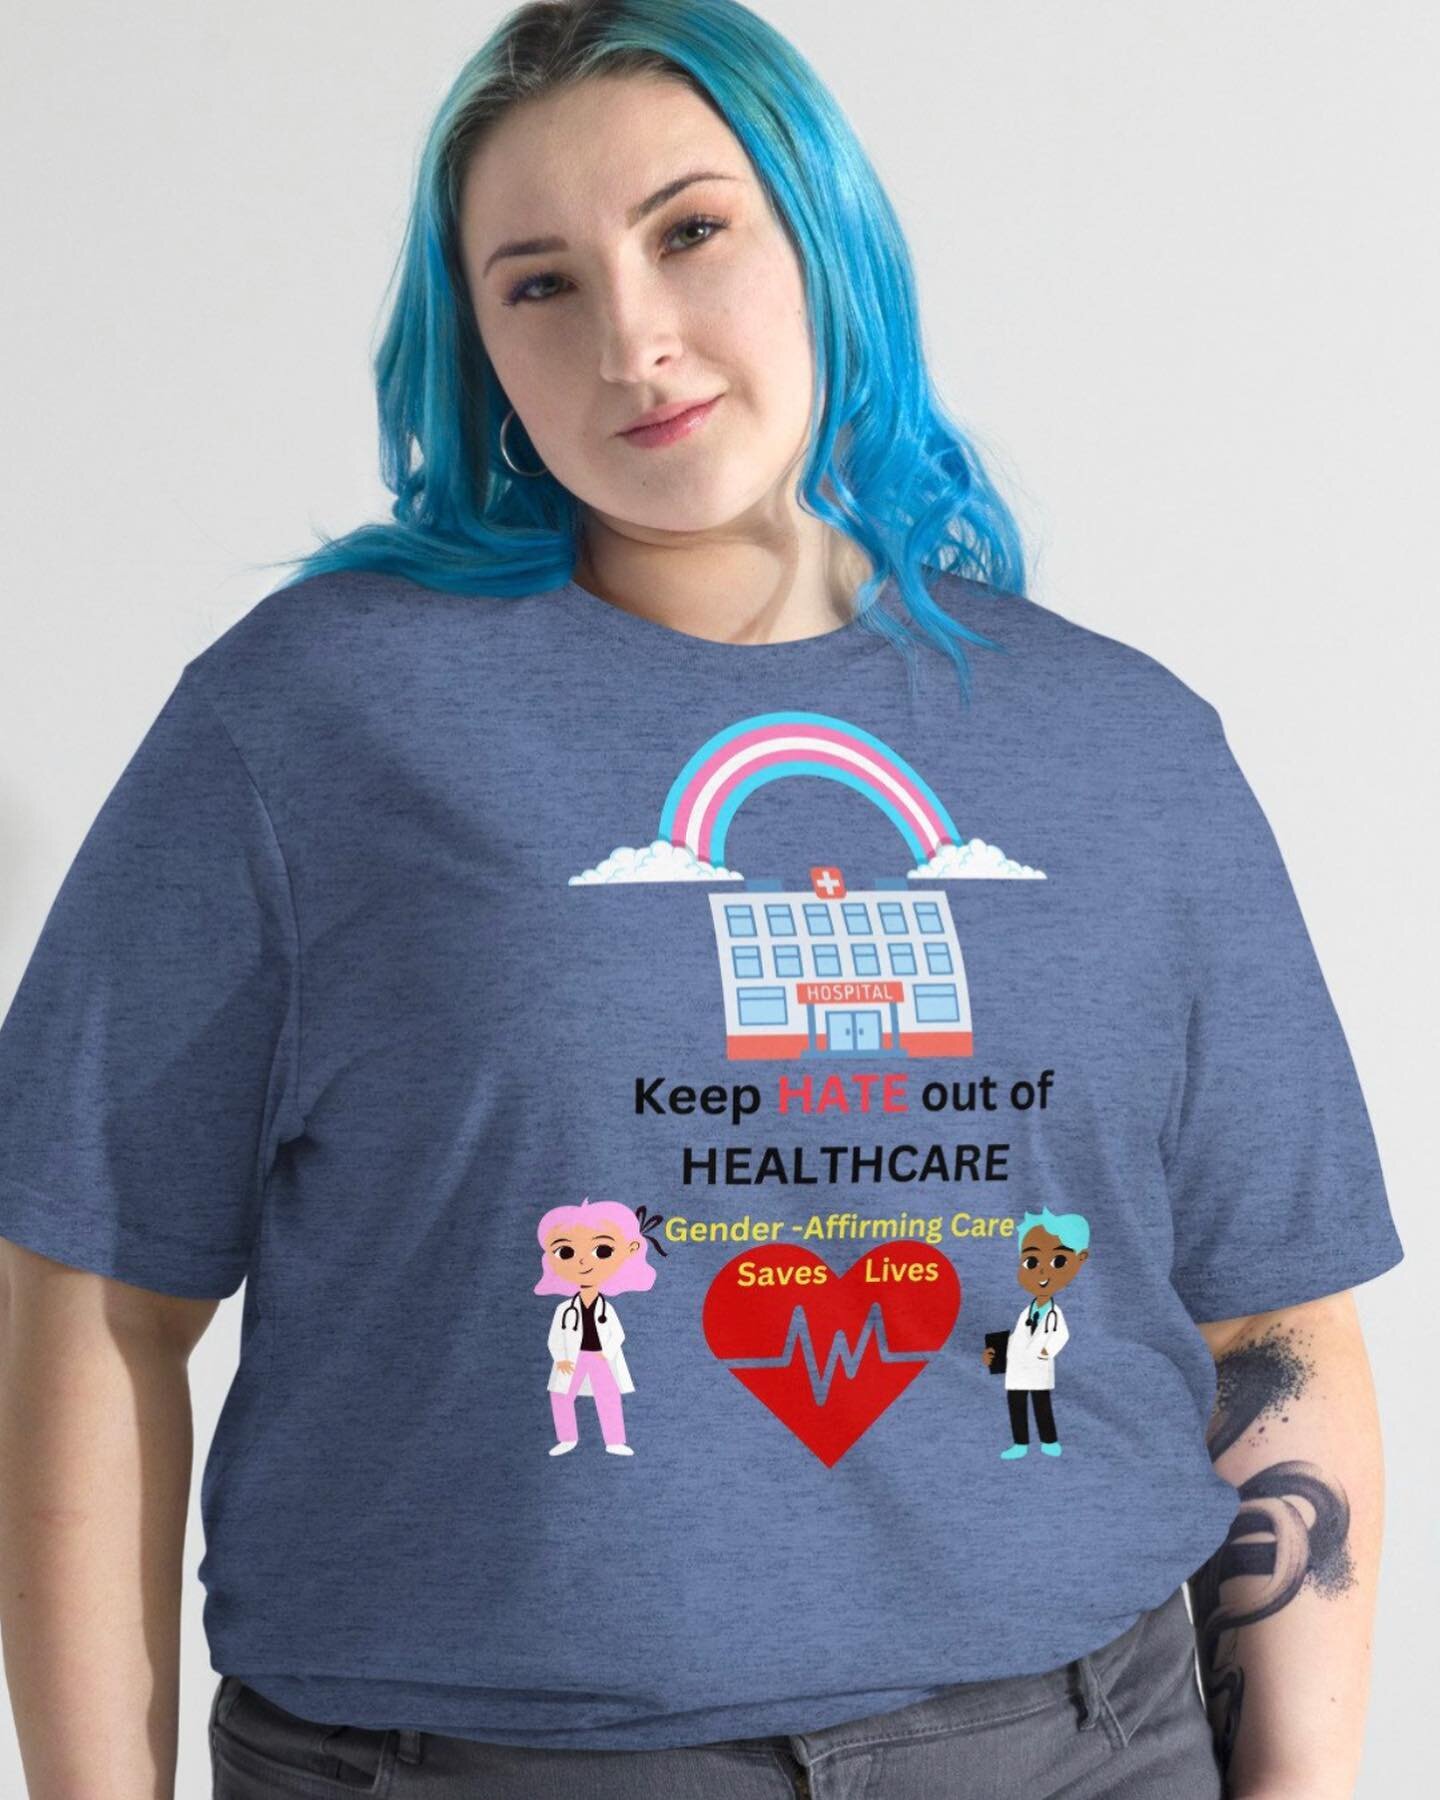 Healthcare for everyone!! #lgbt #genderequality #healthcare www.mygoodshirt.shop